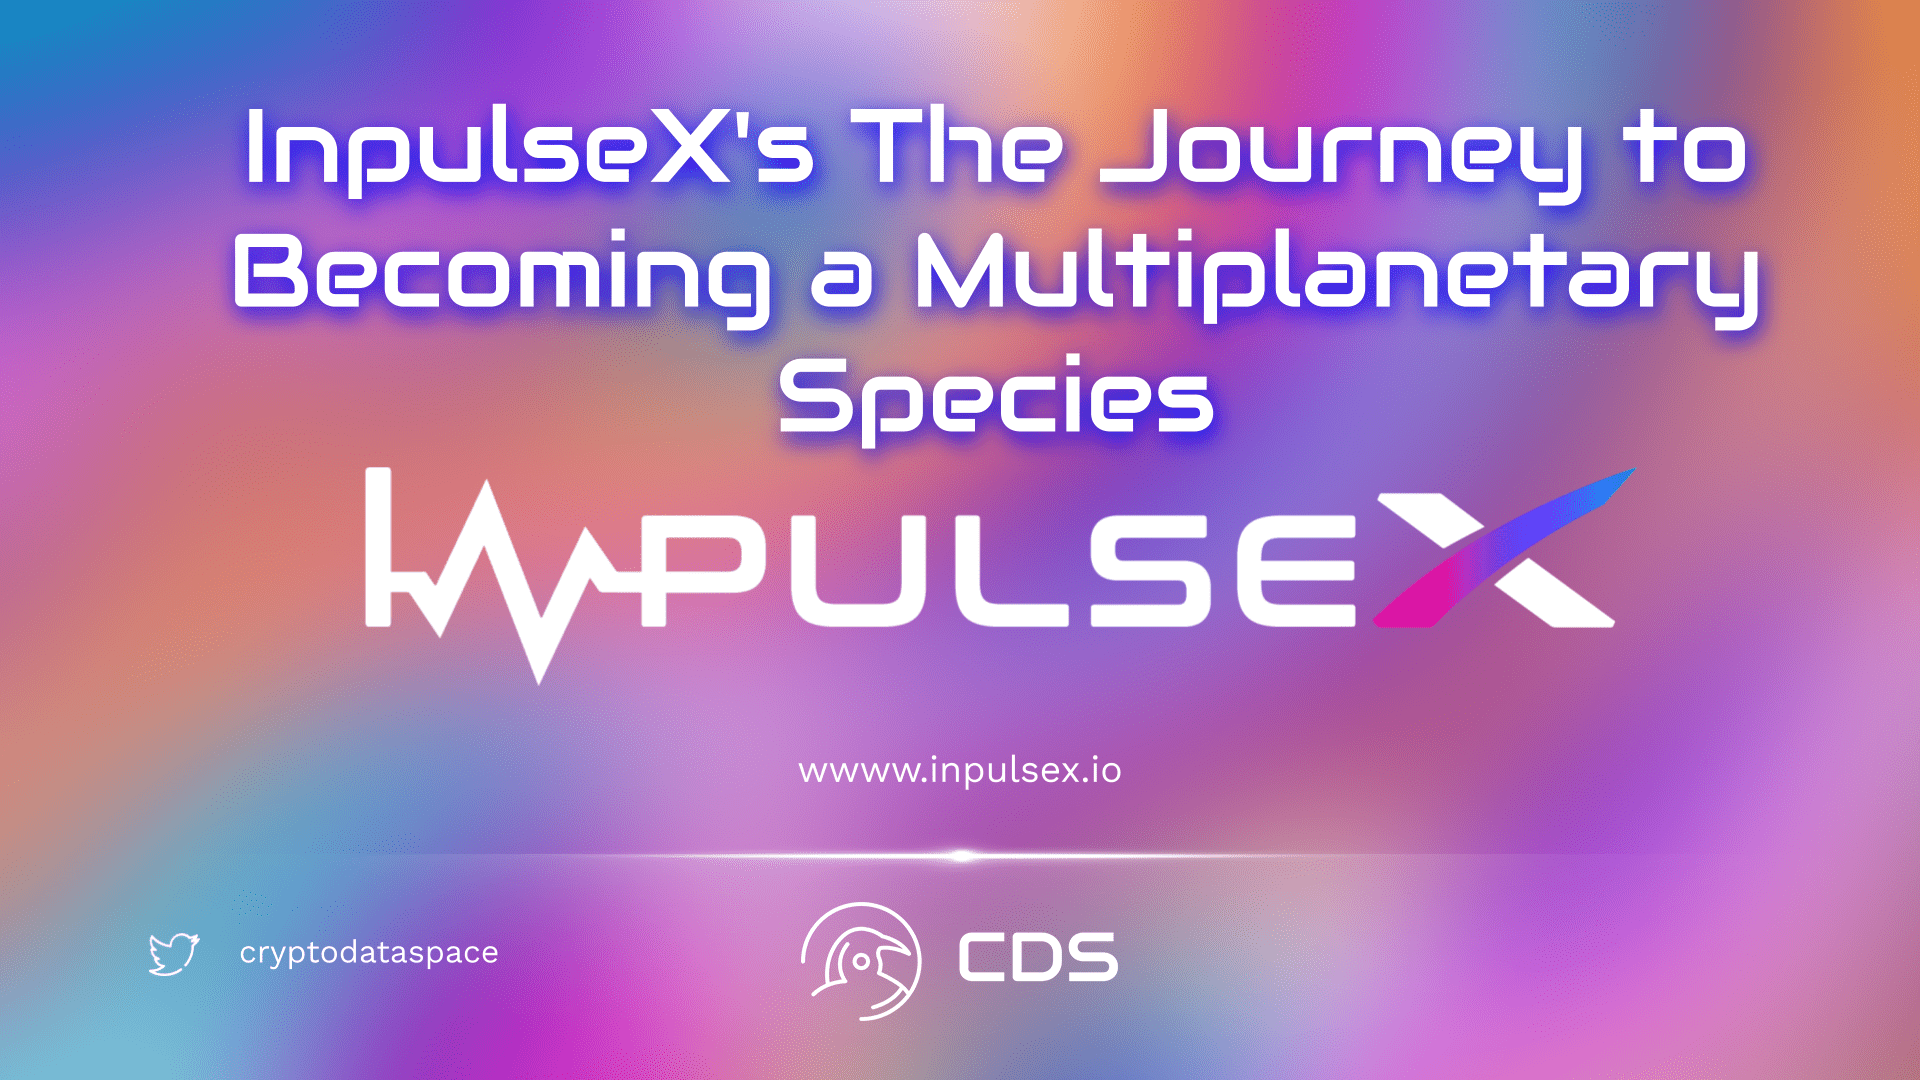 InpulseX's The Journey to Becoming a Multiplanetary Species